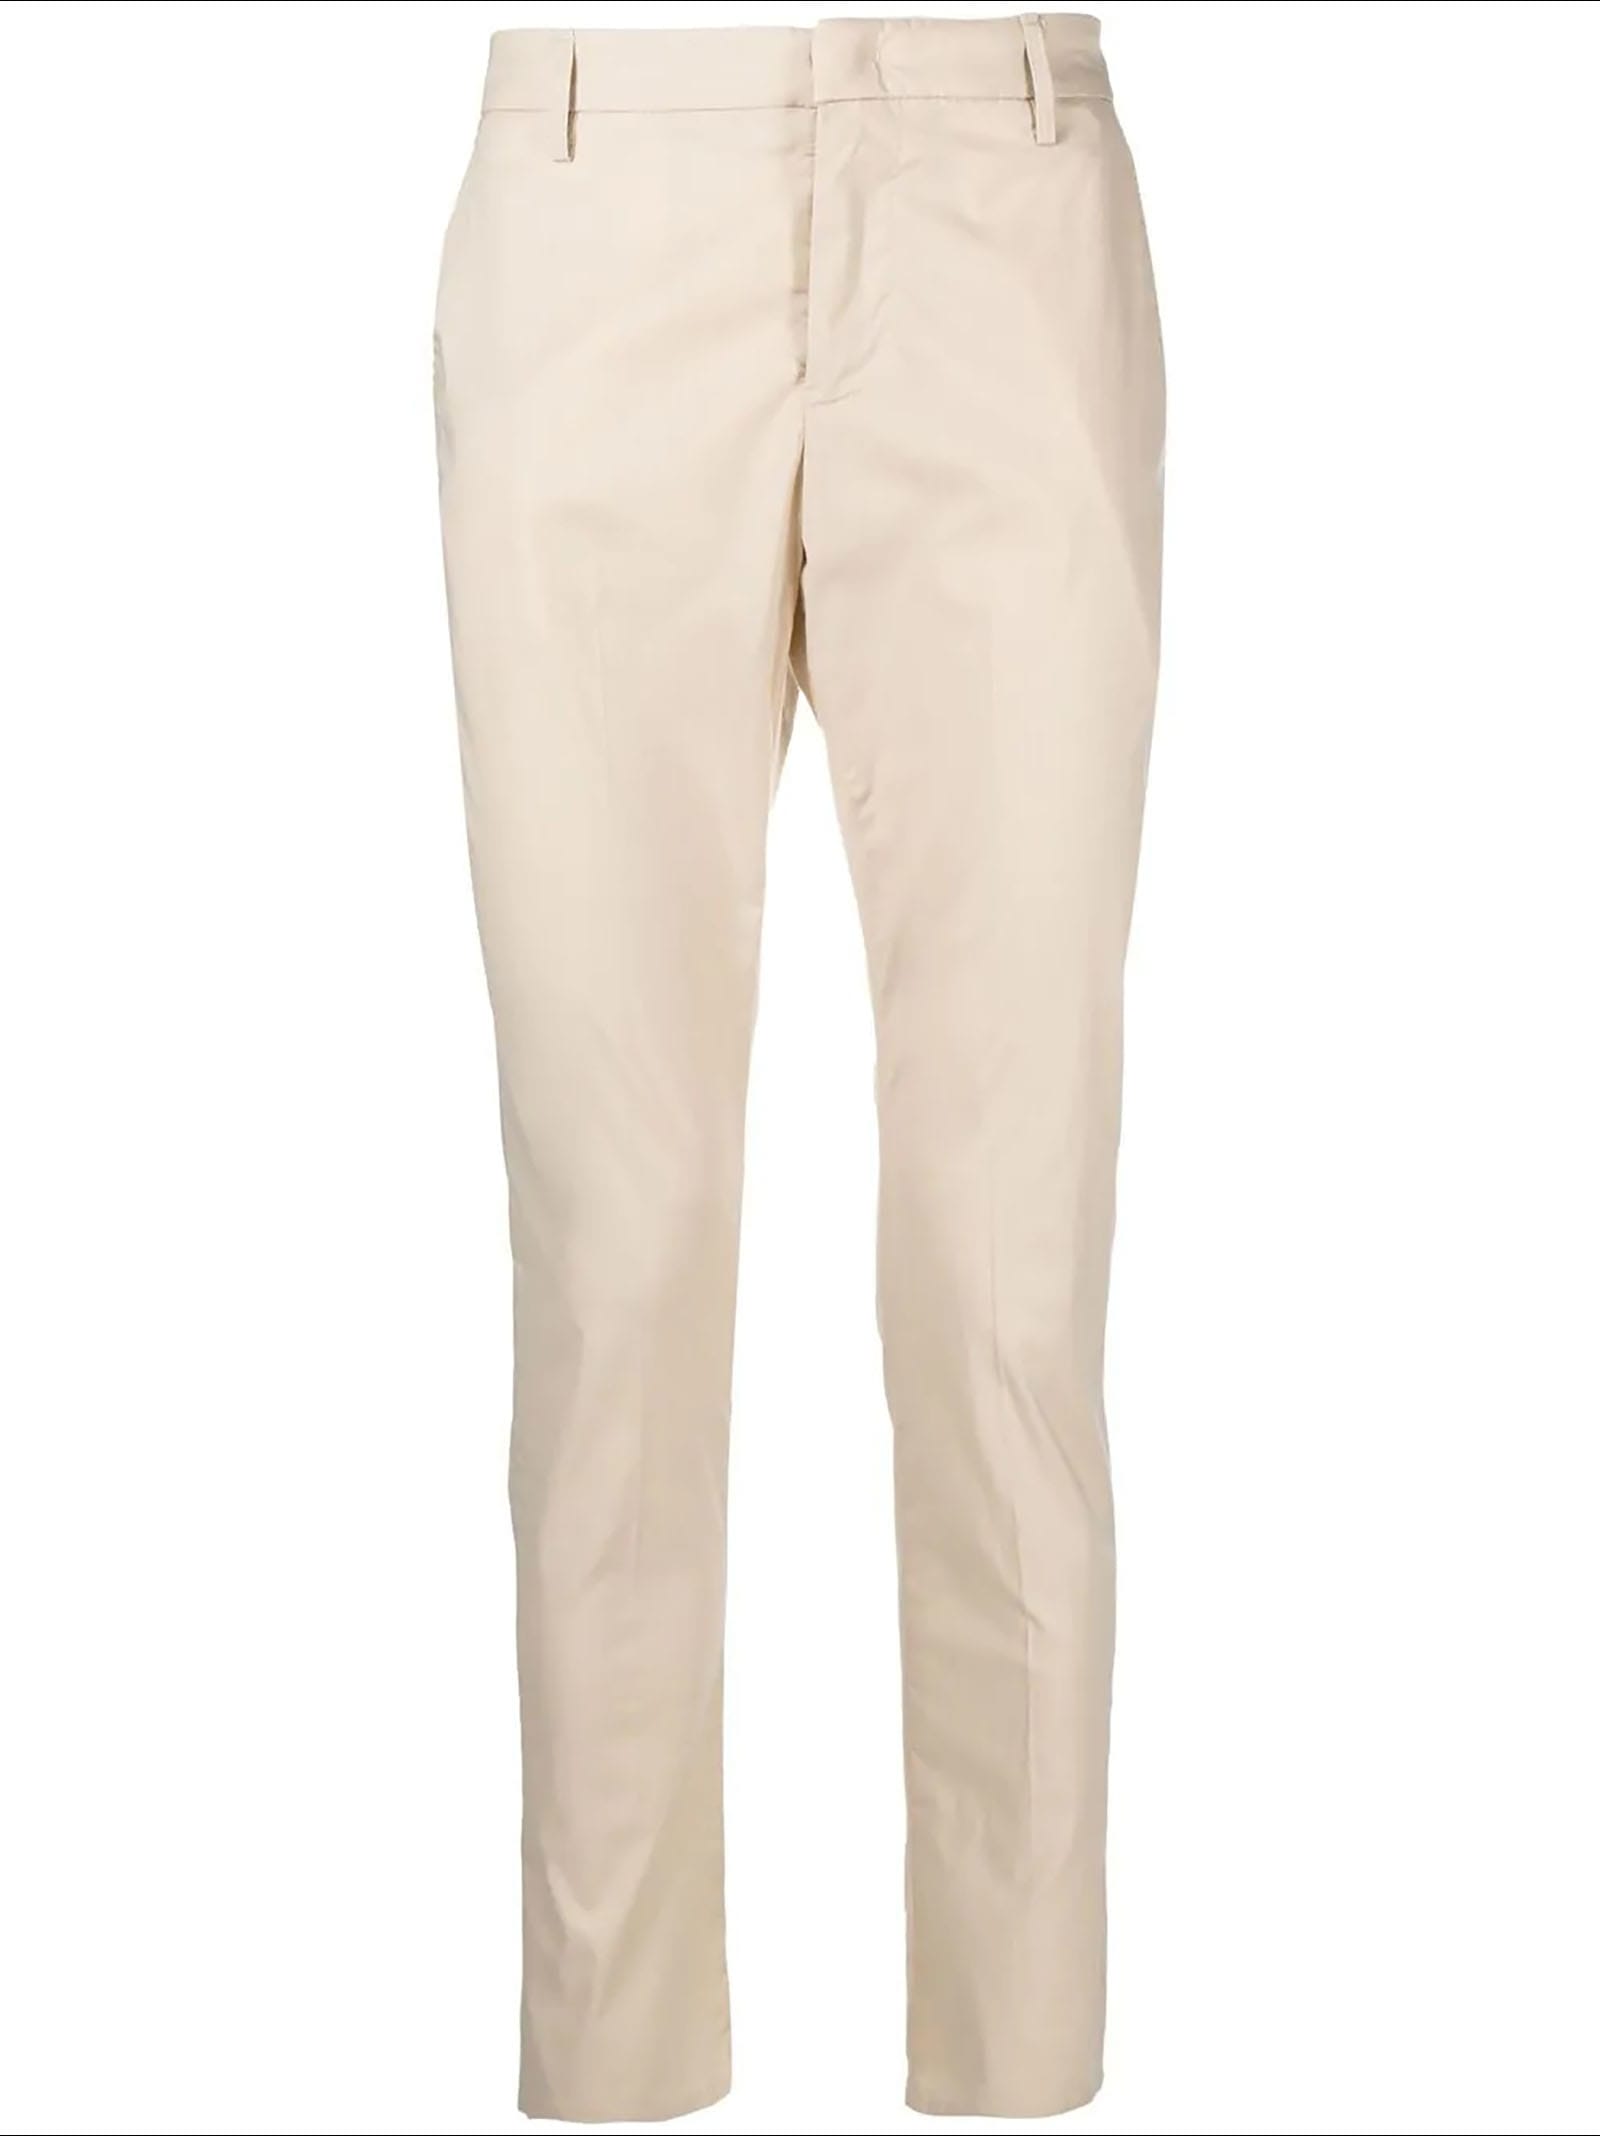 Dondup Beige Stretch Cotton Trousers